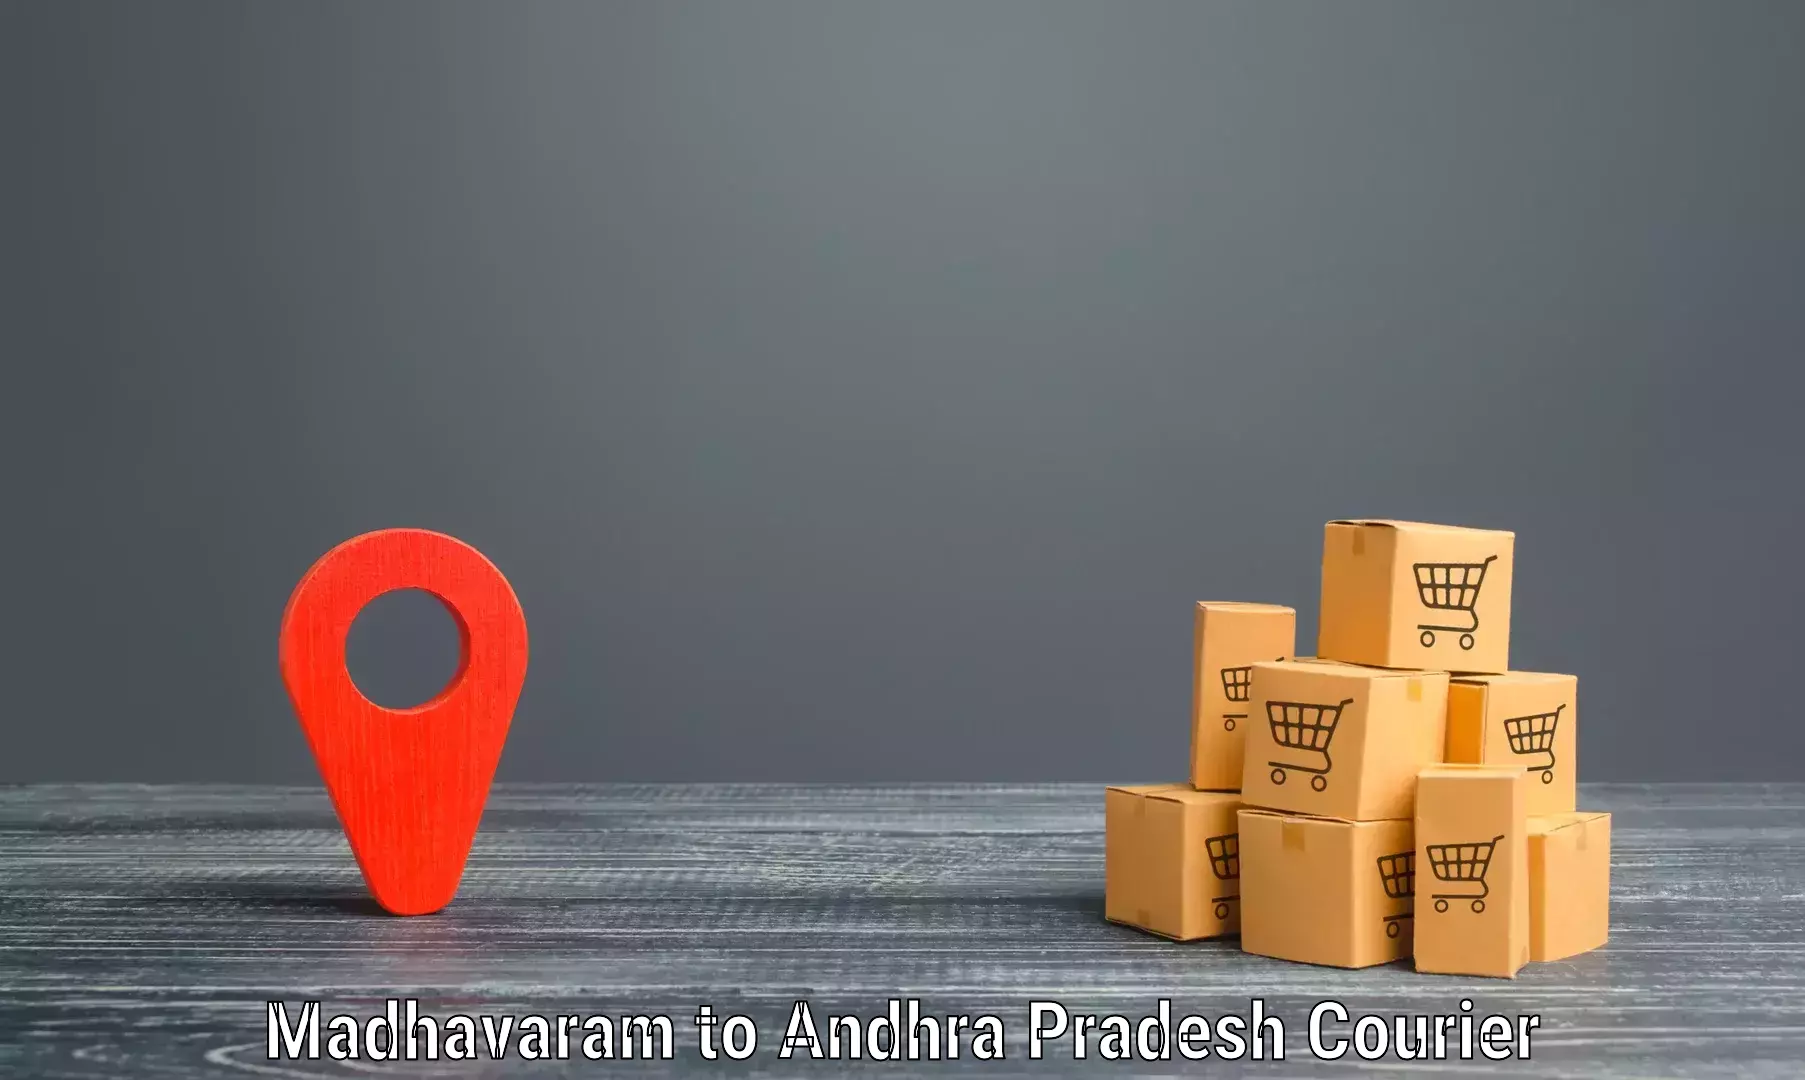 Overnight delivery services in Madhavaram to Chagallu